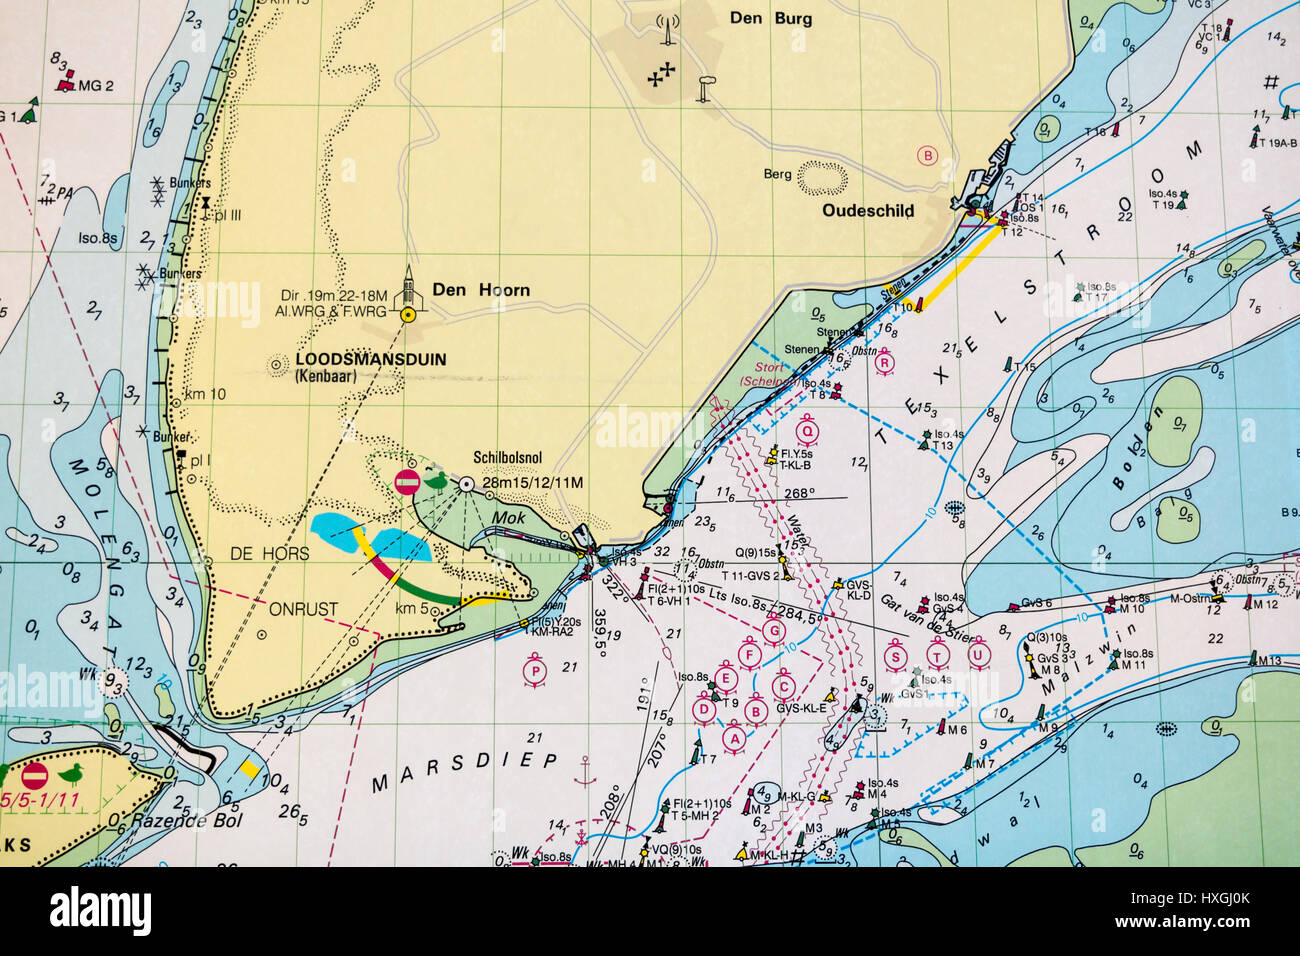 Modern Dutch nautical chart for marine navigation showing Texel island and part of Waddensea, Netherlands Stock Photo